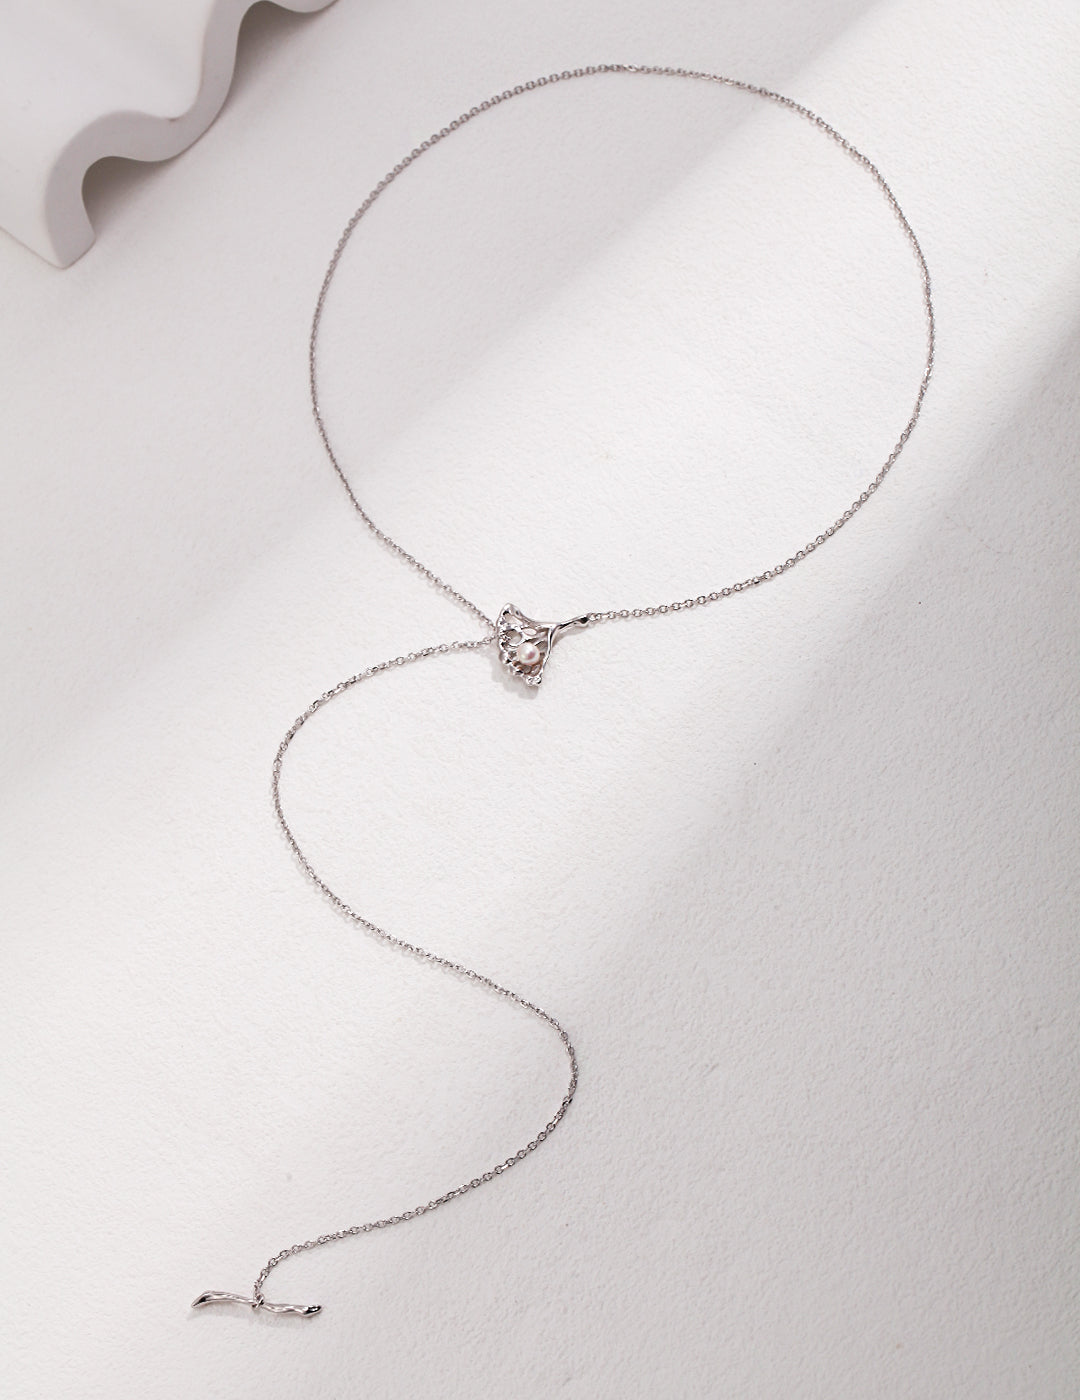 Sophisticated Drop Necklace Featuring Ginkgo Leaf and Pearl